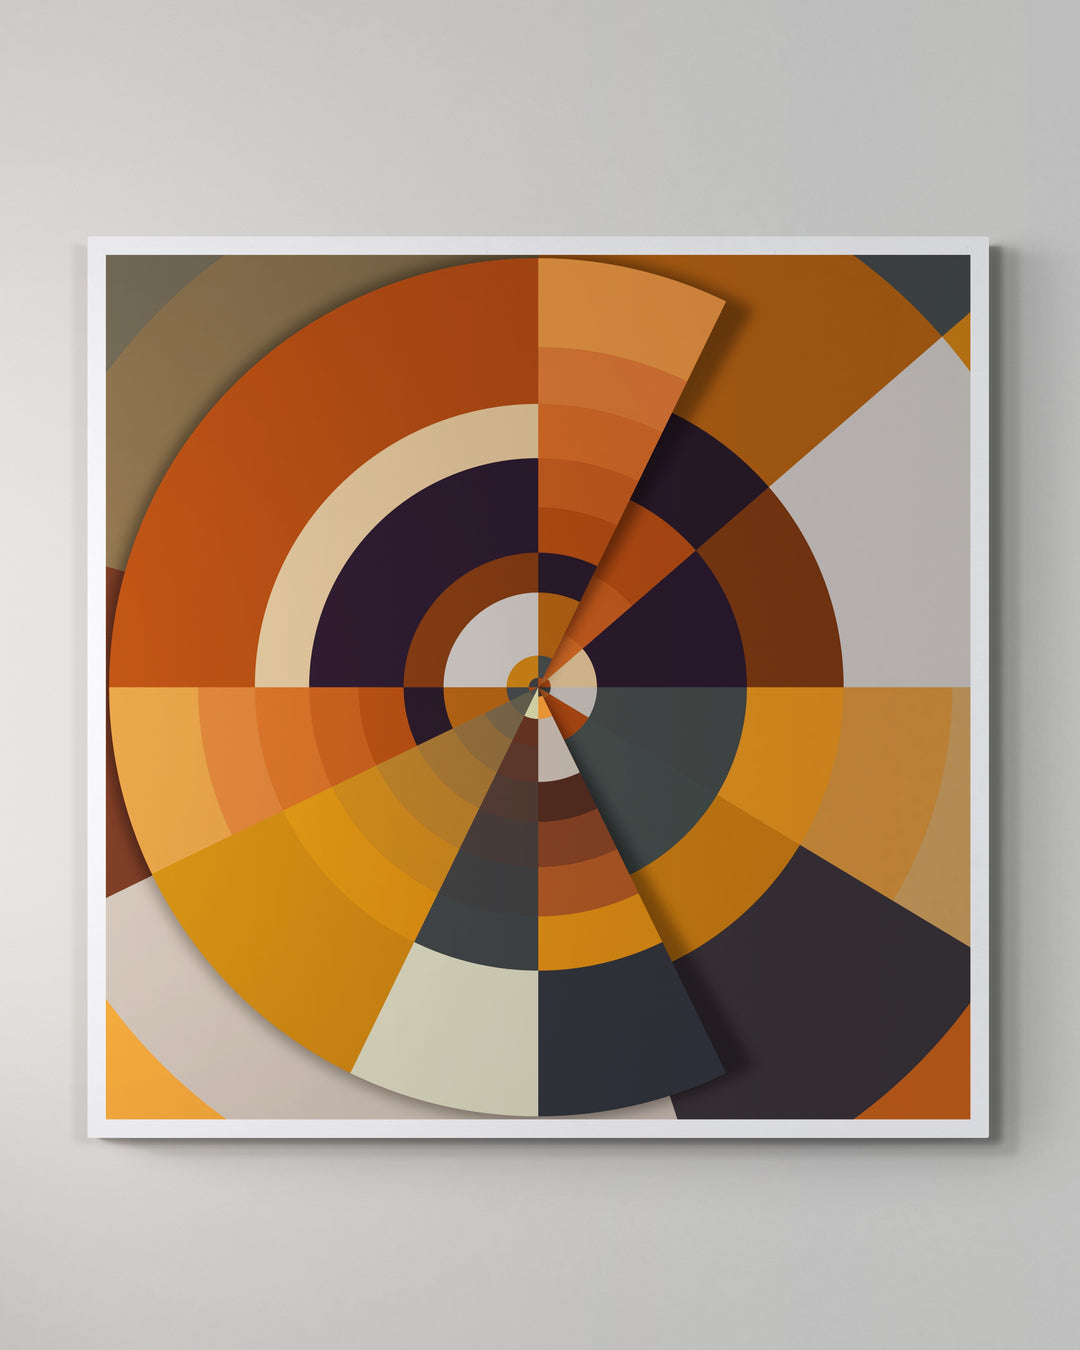 A giclée print of a colorful geometric digtal artwork on a white wall. Abstract circle and semi circular patterns, mainly white, yellow and brown colors.